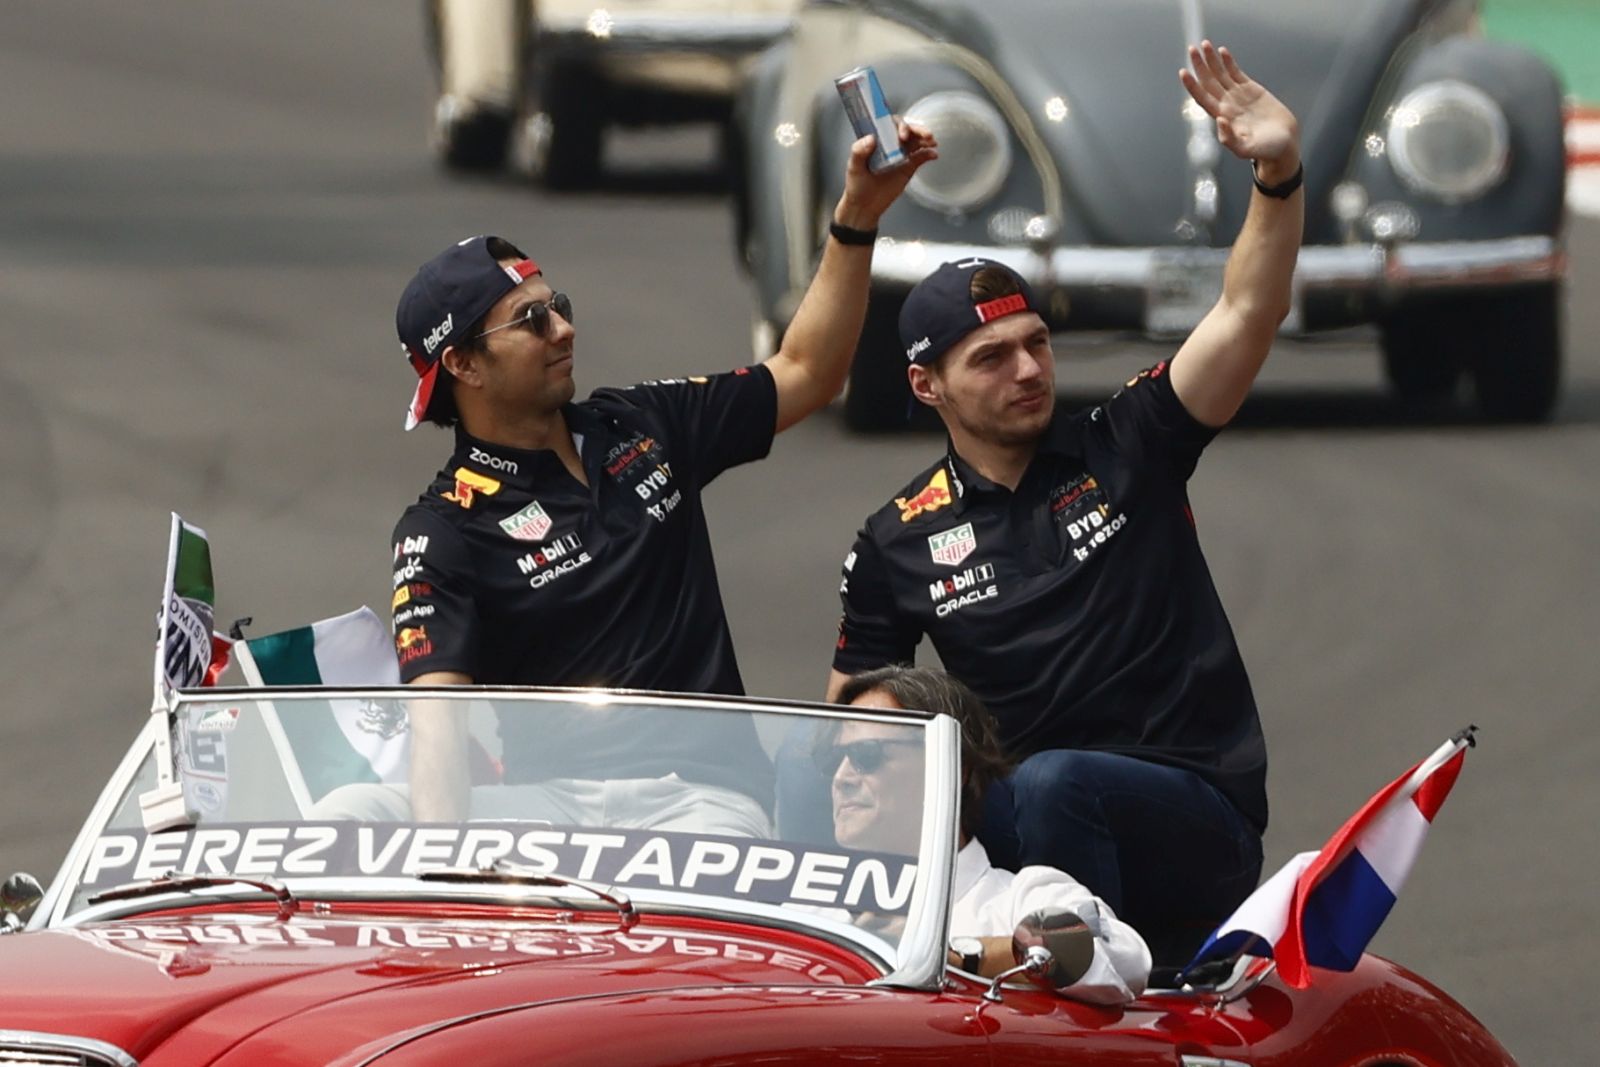 epa10275793 Mexican Formula One driver Sergio Perez (L) and the Dutch Formula one driver Max Verstappen of Red Bull Racing during the parade before the race of the Formula One Grand Prix of Mexico City at the Circuit of Hermanos Rodriguez in Mexico City, Mexico, 30 October 2022. The Formula One Grand Prix of the Mexico City takes place on 30 October 2022 at the Circuit of Hermanos Rodriguez.  EPA/Jose Mendez